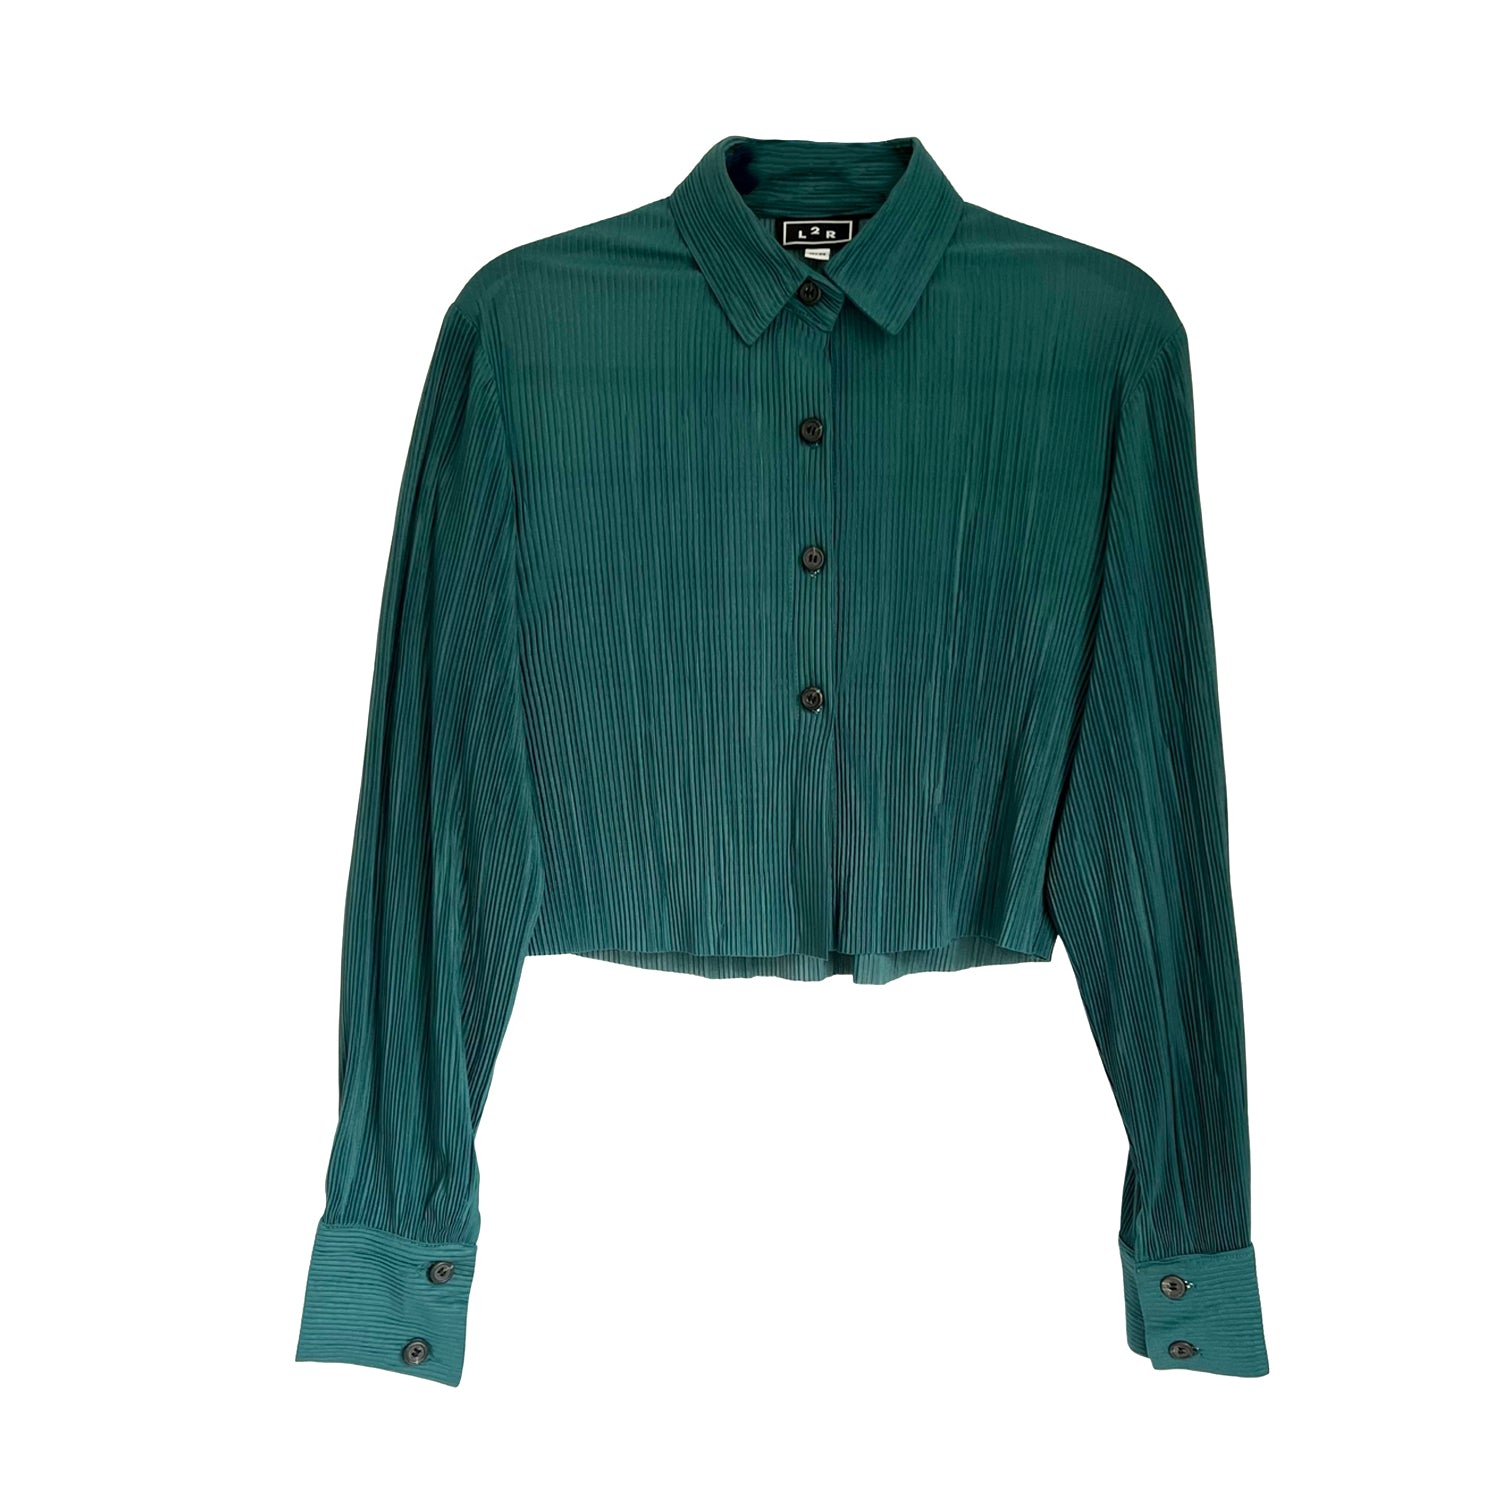 L2r The Label Women's Cropped Pleated Shirt - Green